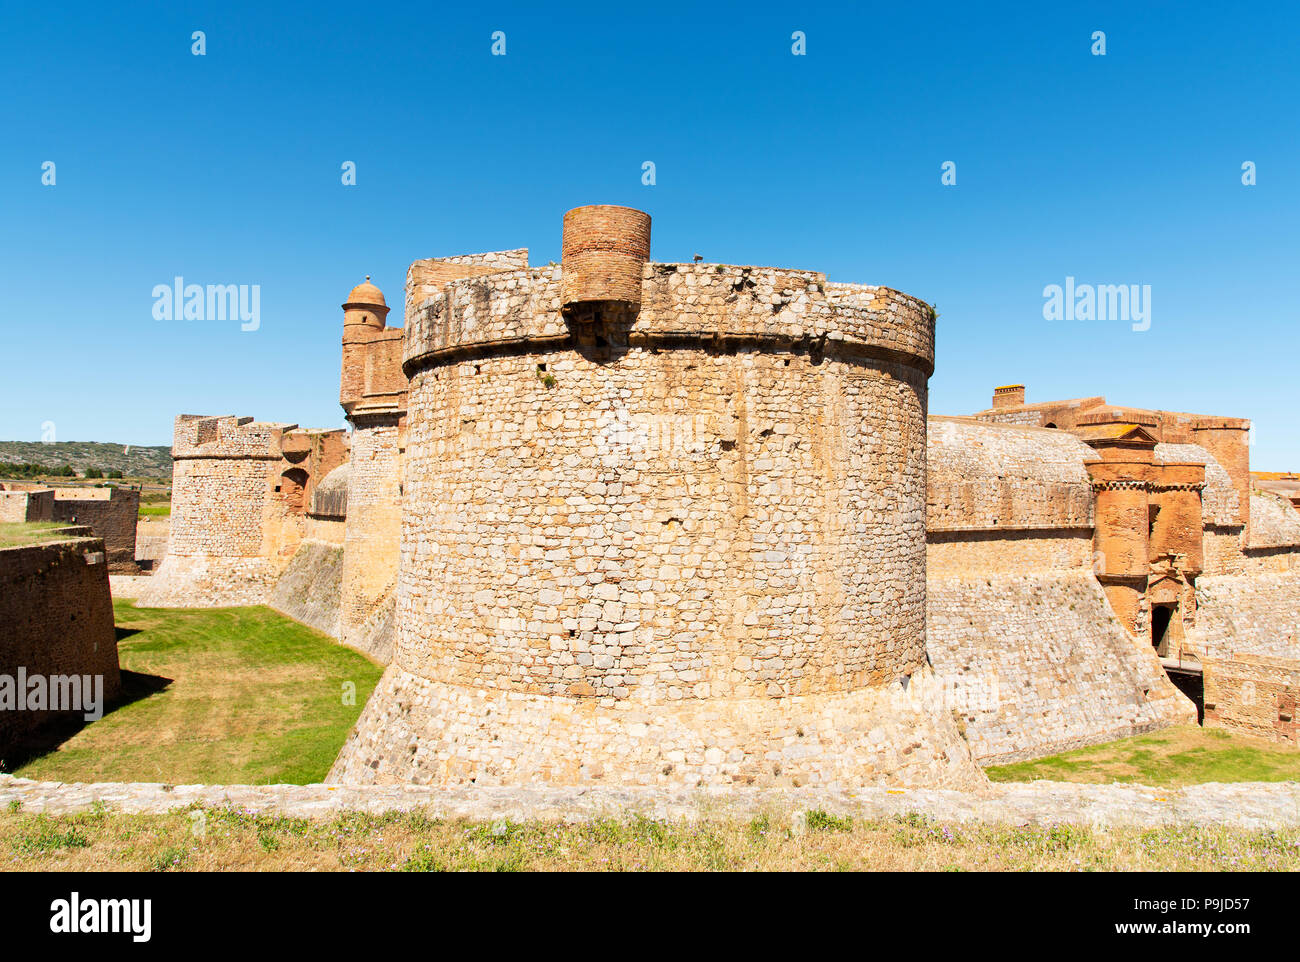 detail of the fortress Fort de Salses, built in the 15 century, in Salses-le-Chateau, France Stock Photo